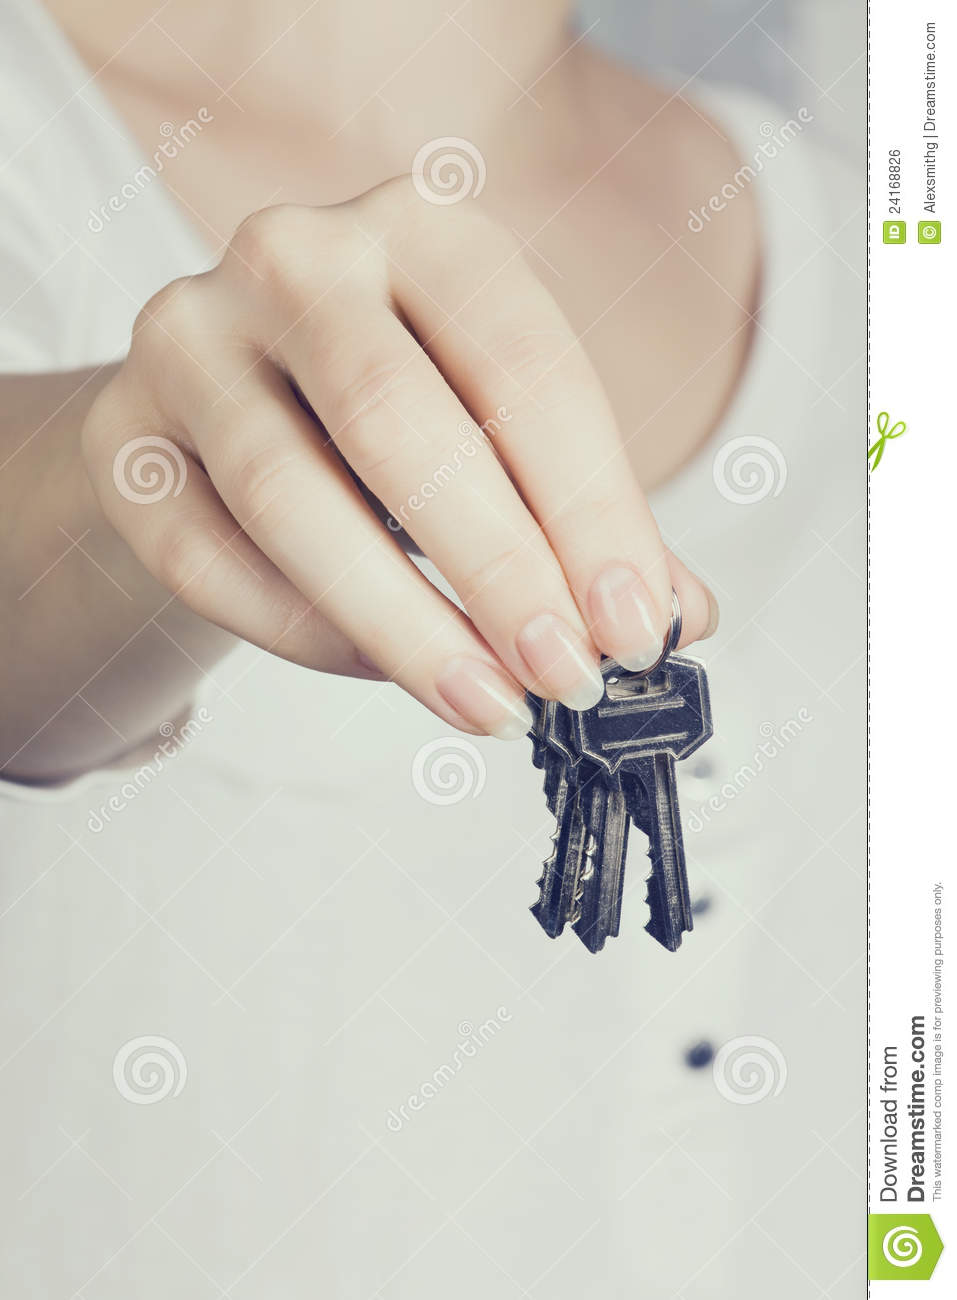 Woman S Hand Holding New Keys Royalty Free Stock Image   Image